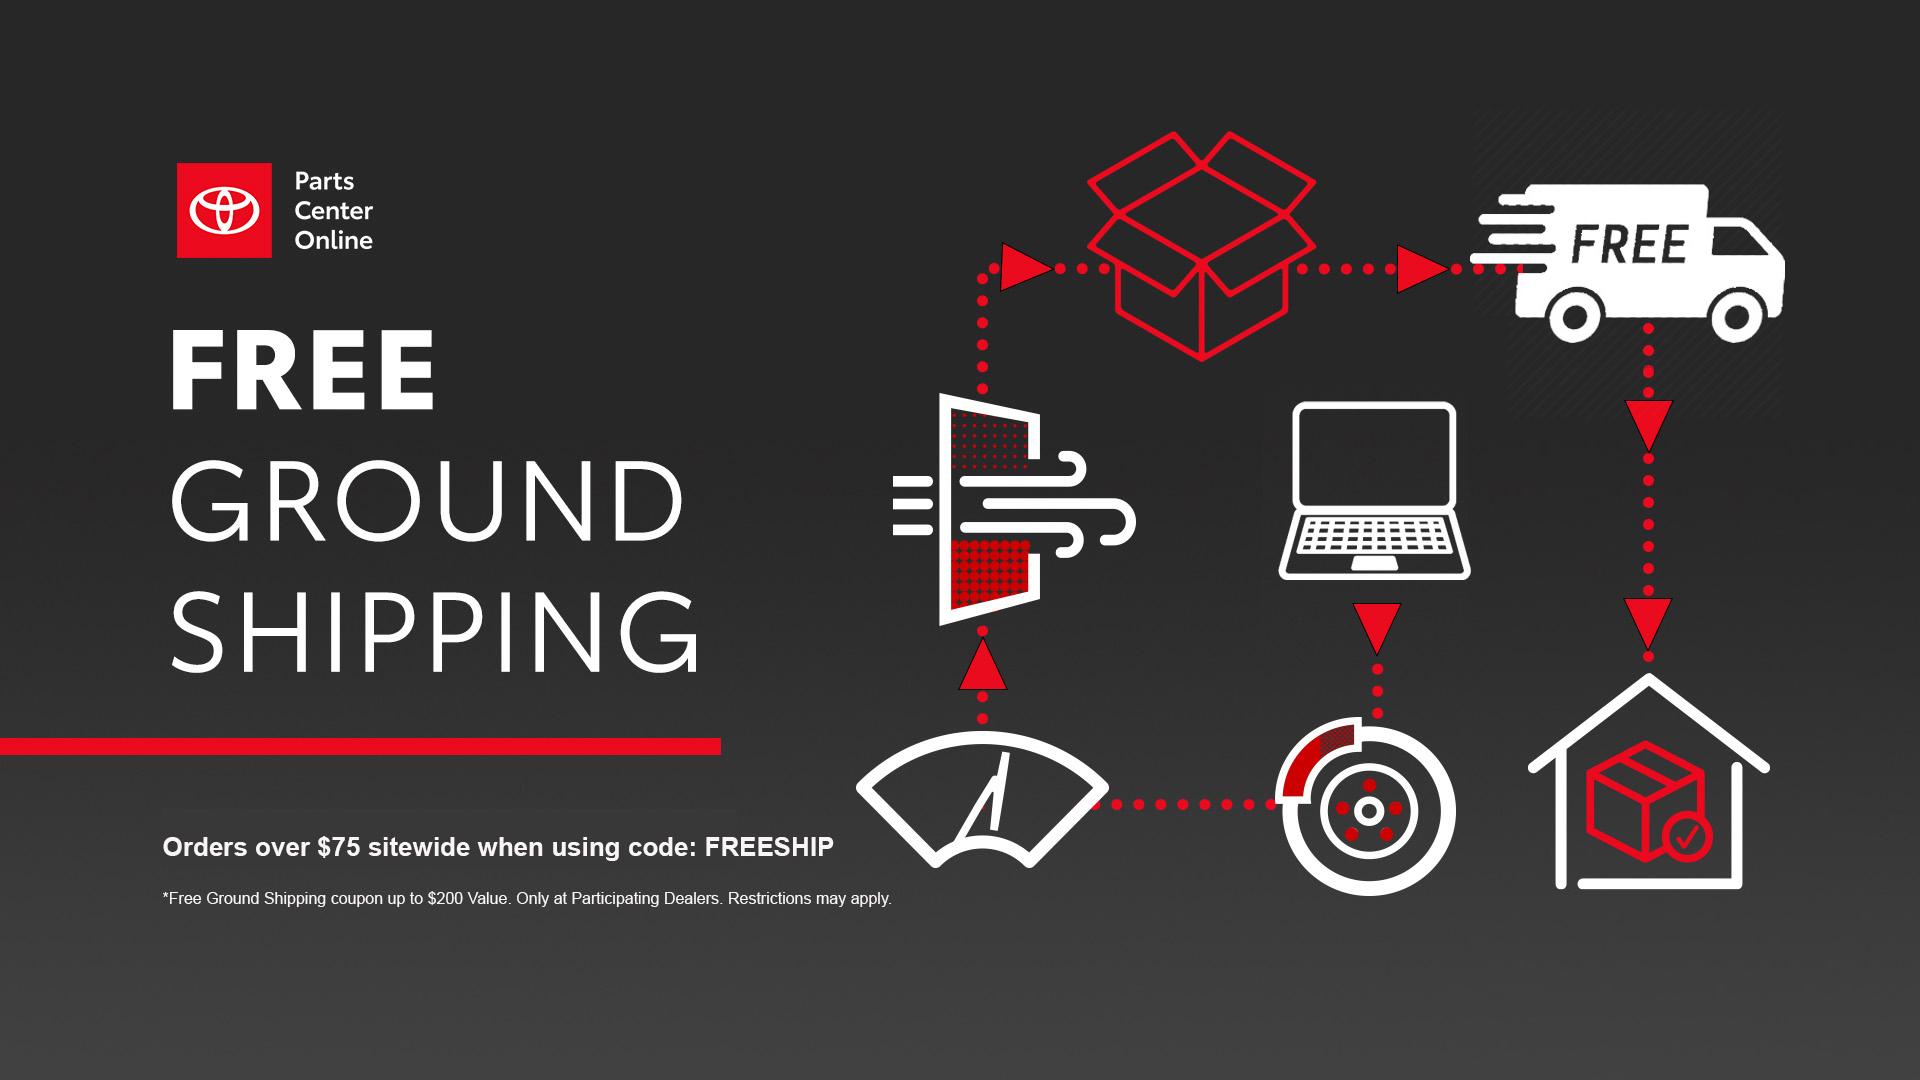 Free Ground Shipping on Toyota Parts orders over $75 with code